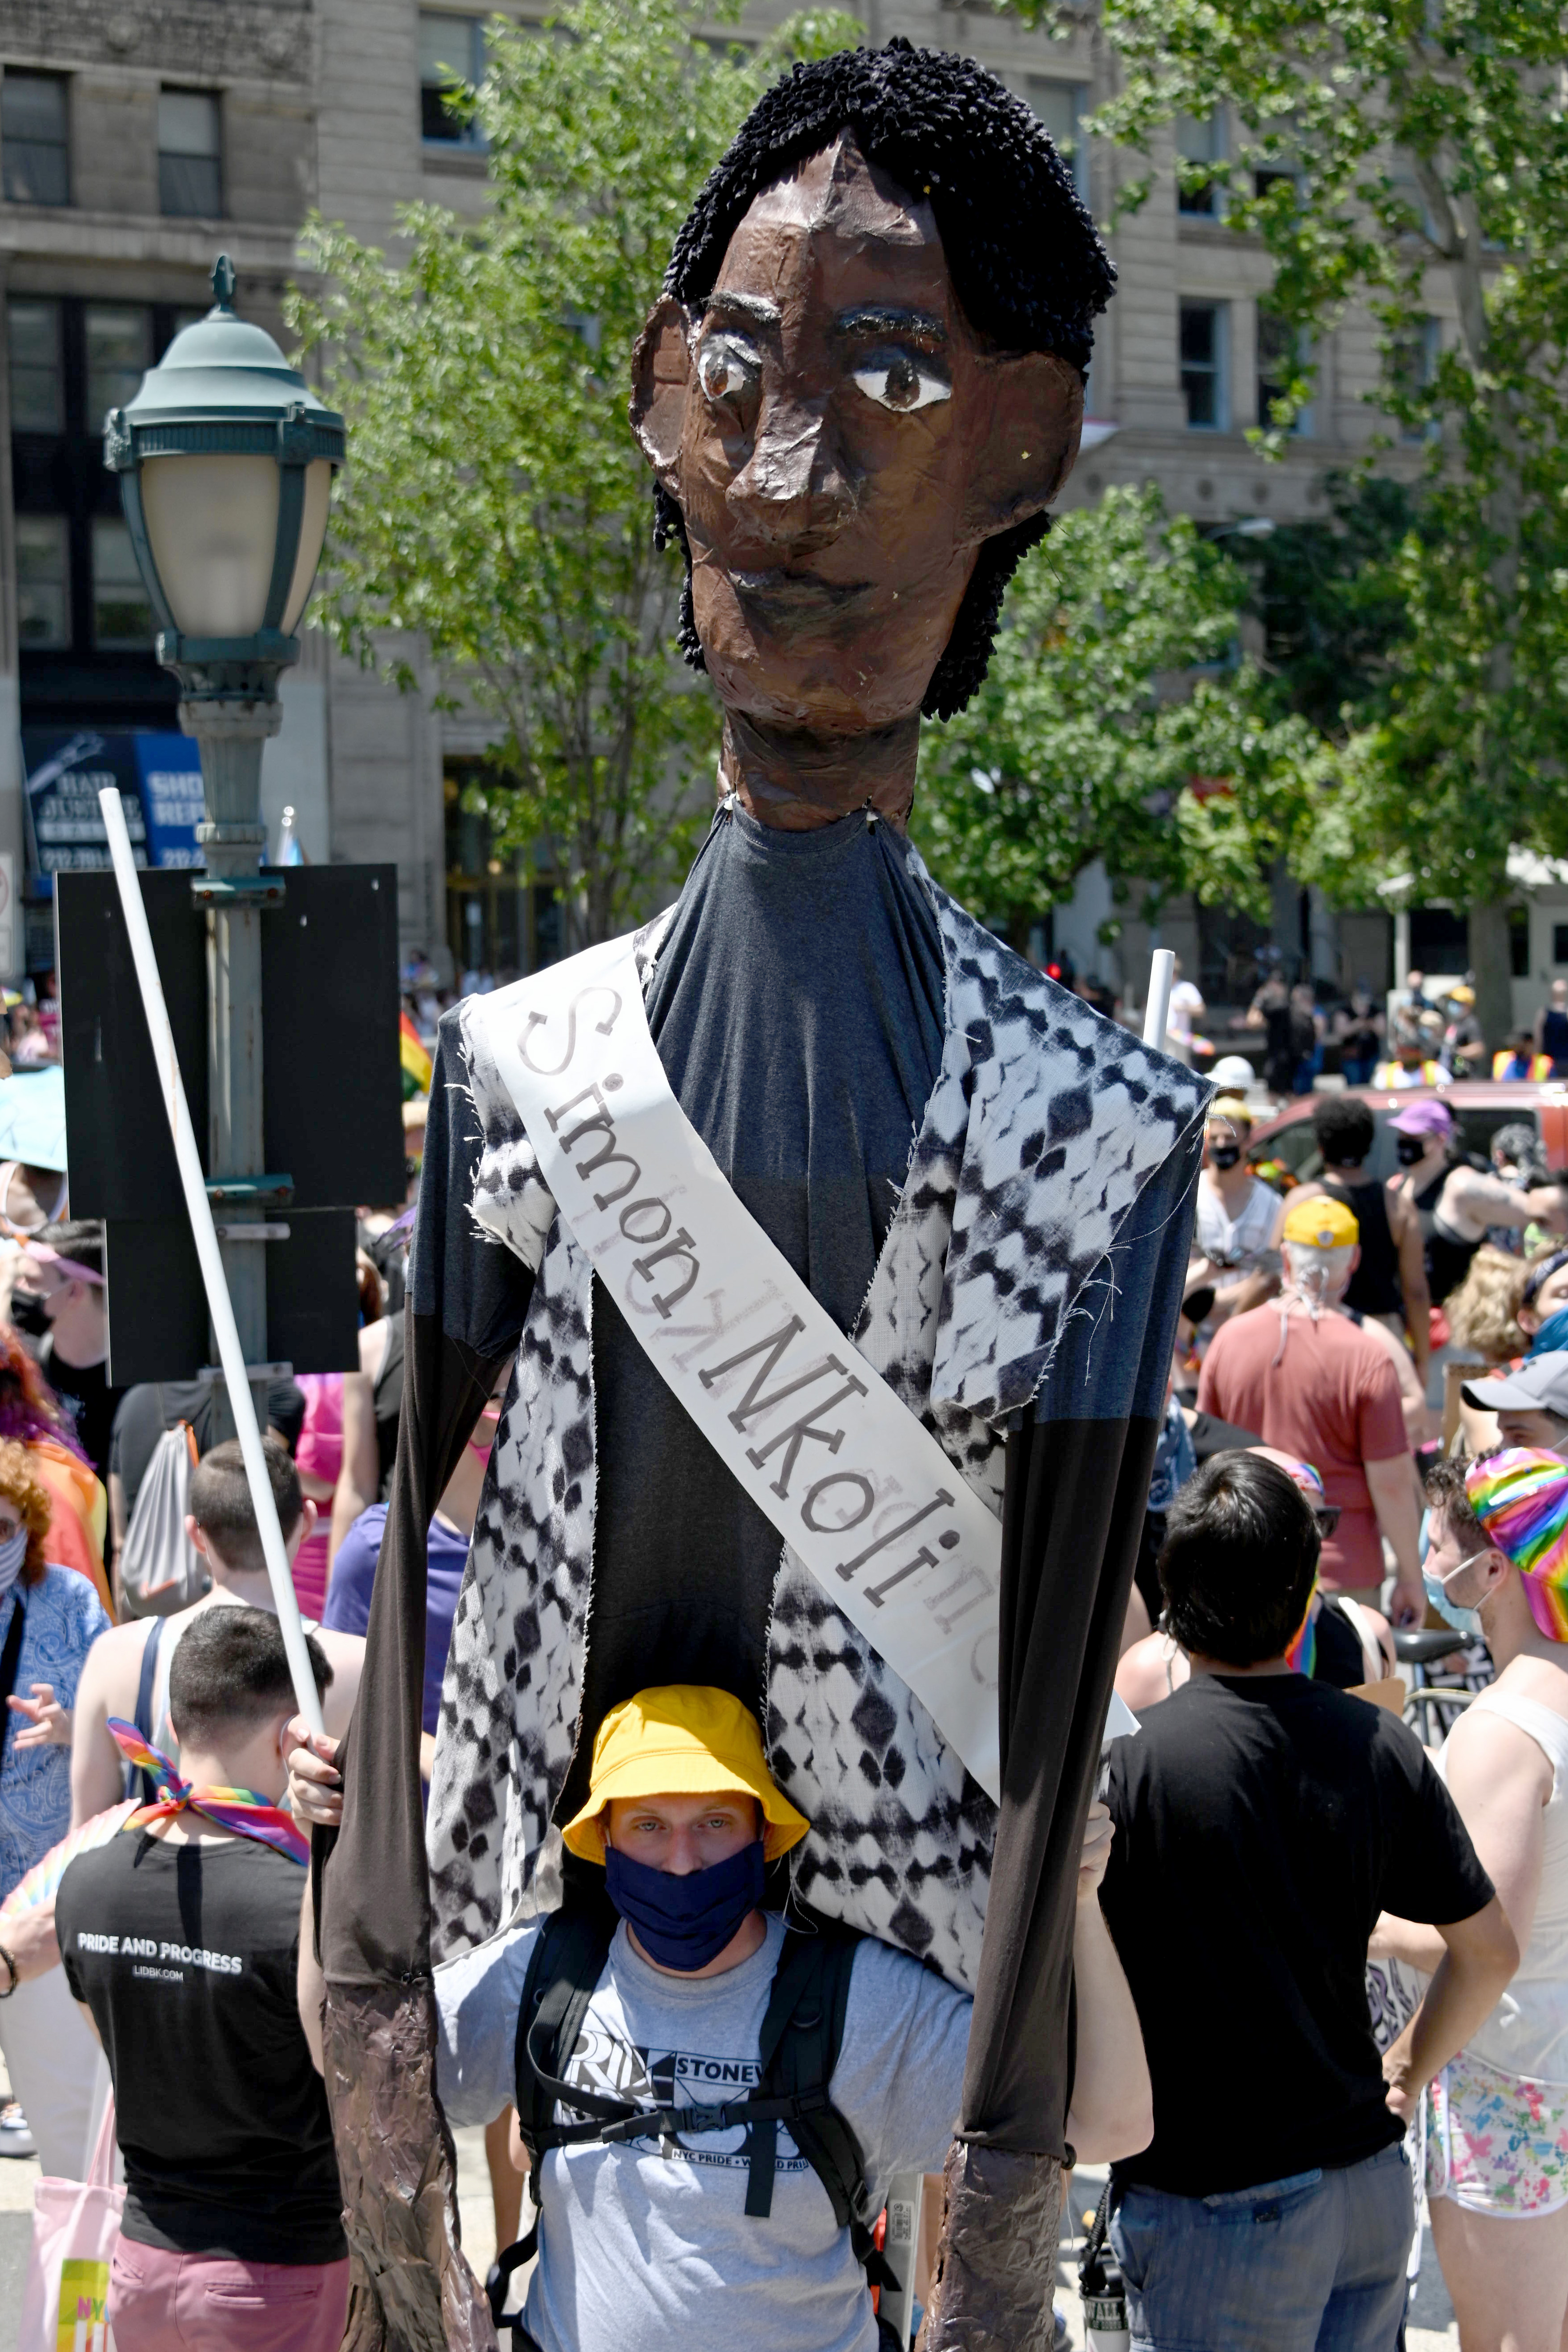 NEW YORK, NEW YORK - JUNE 28: A person wears a Simon Nkoli puppet by artist Chris Williams at the Queer Liberation March for Black Lives & Against Police Brutality on June 28, 2020 in New York City. Due to the ongoing coronavirus pandemic, this year's Pride march had to be canceled over health concerns. The annual event, which sees millions of attendees, marks its 50th anniversary since the first march following the Stonewall Inn riots. (Photo by Alexi Rosenfeld/Getty Images)